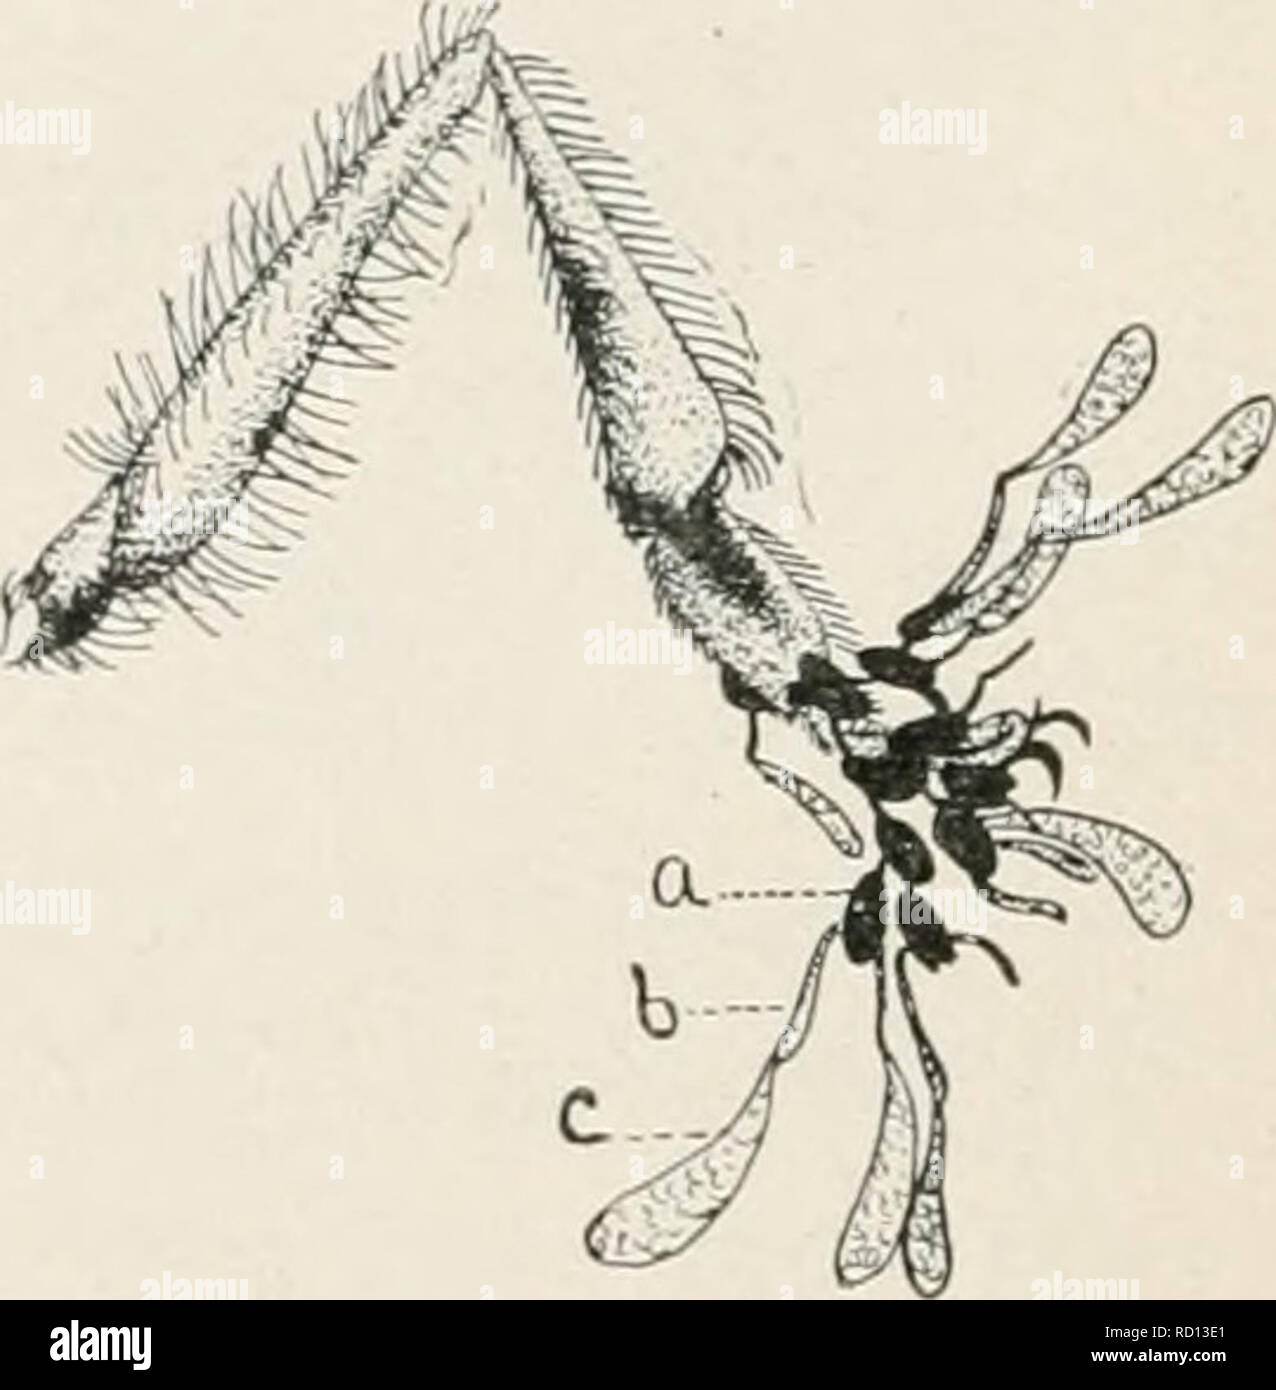 . Elementary studies in insect life. Insects. FIG. 96. Pollen-masses attached to leg of bee. a, central body (cor- FIG. 95. Leg of insect pusculum); 6, band (or retinaculum) with small chain of corpus- joining pollen-mass to central body; cula. Photographed from c, pollen-mass (pollinium). Drawn nature by W. C. Stevens. from nature. retinaculum. This serves to catch other corpuscula rest- ing in their natural positions, so that we can frequently find insects that have continued their visits, bearing a whole chain of these corpuscula attached to a claw or some part of the leg. (Fig. 05.) Many i Stock Photo